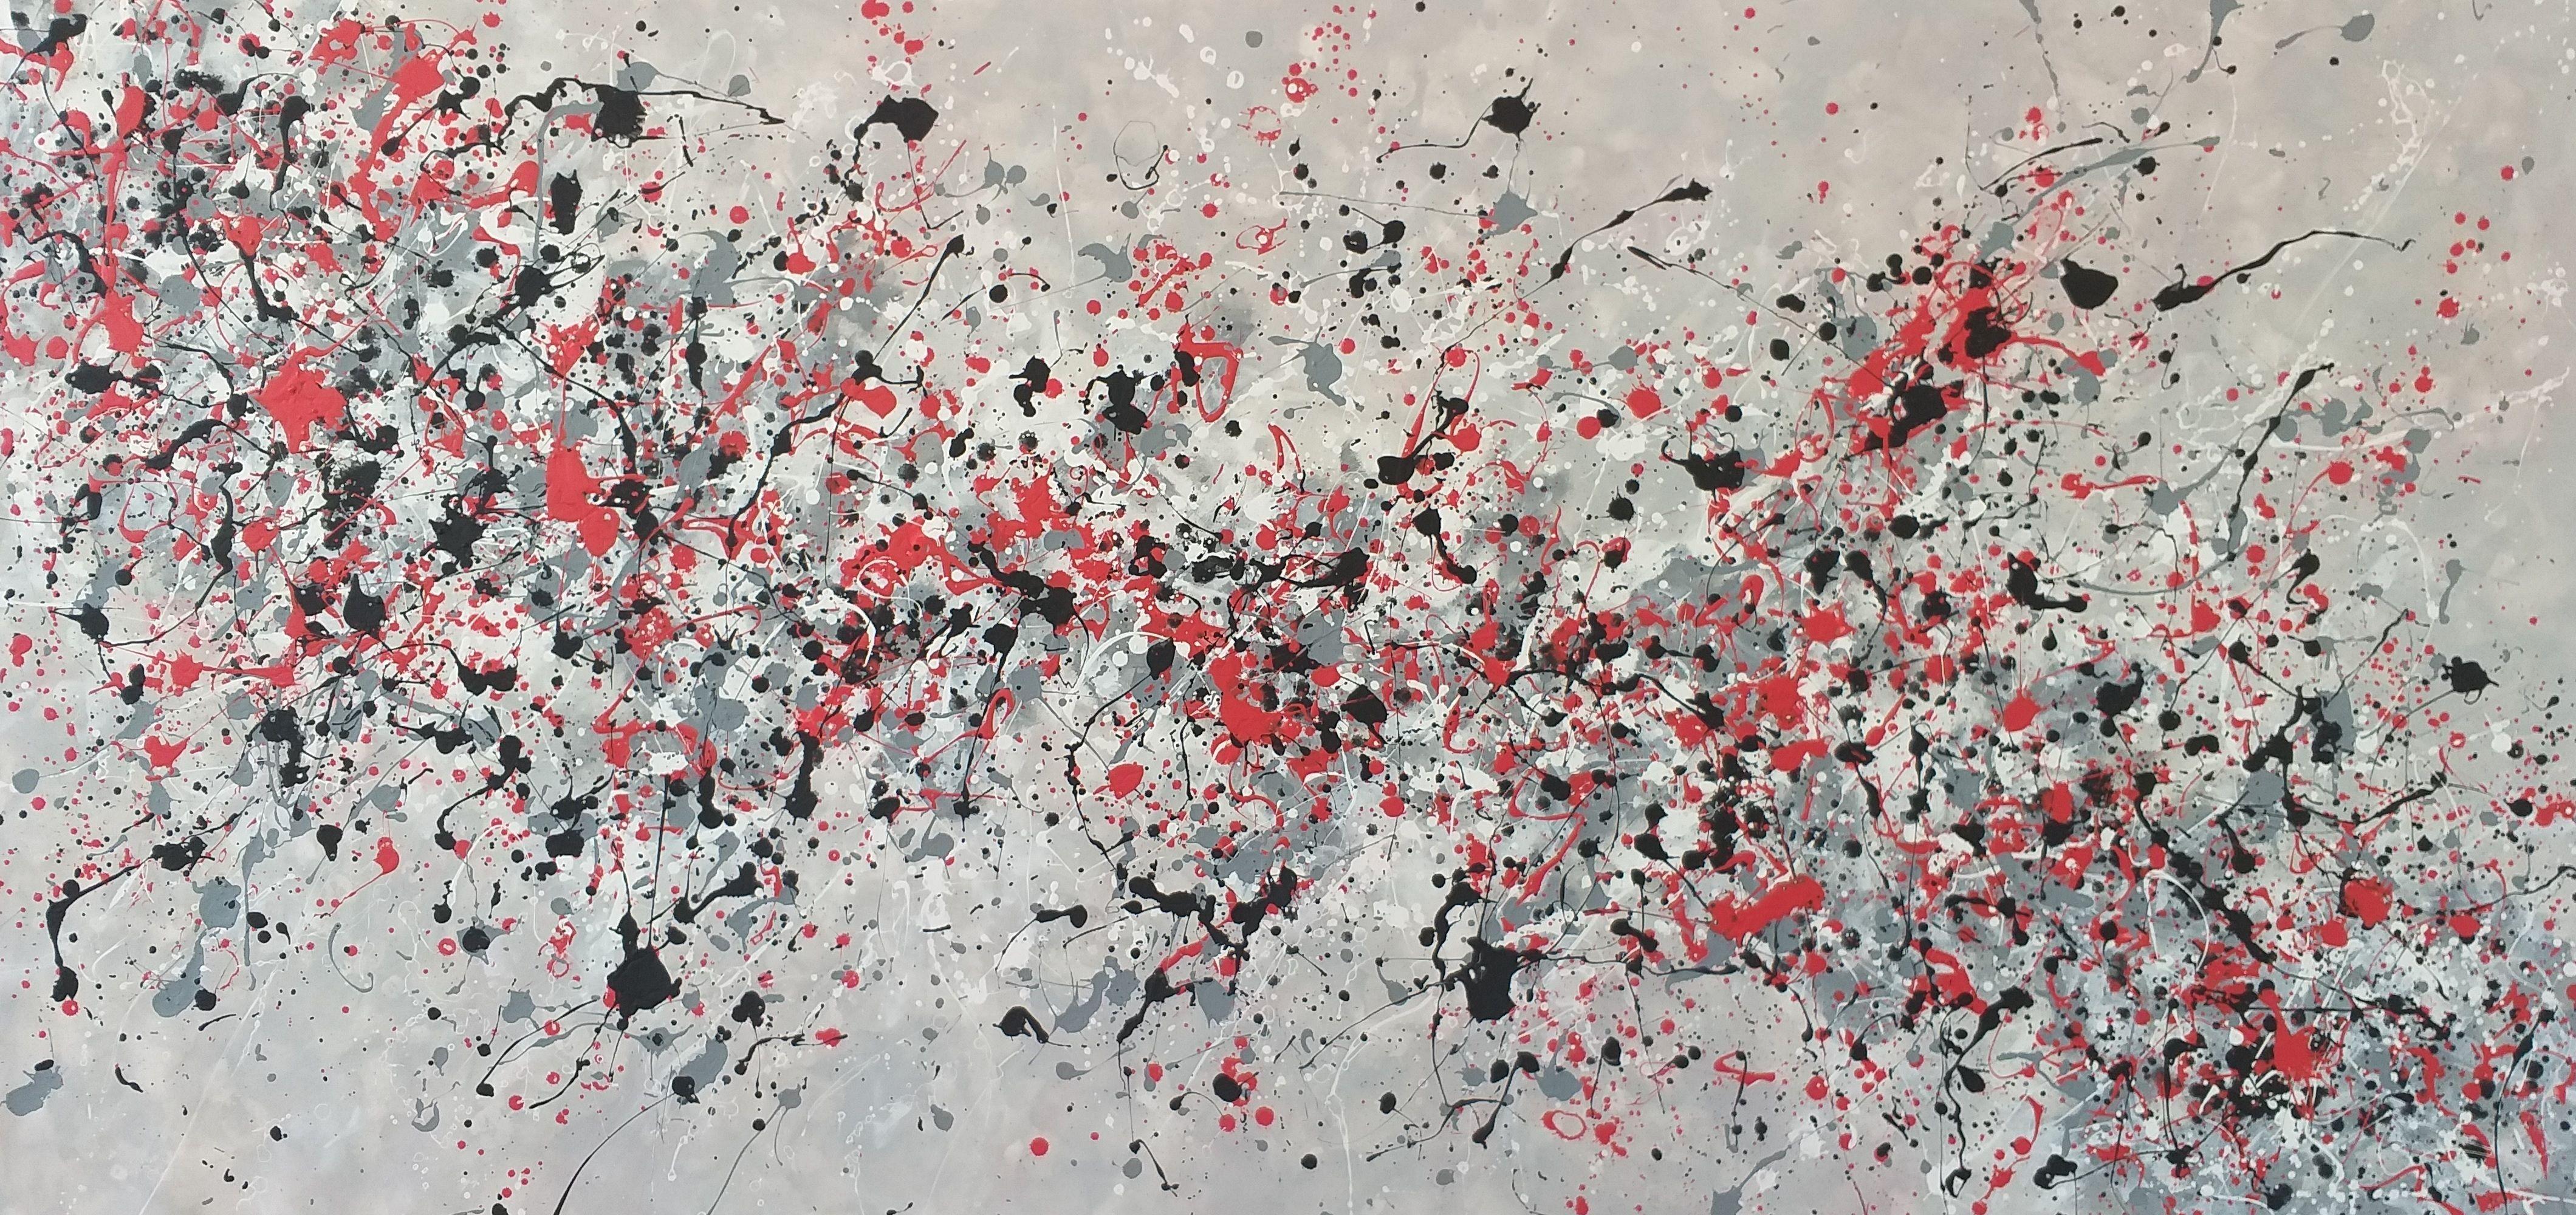 Max Yaskin Abstract Painting - Â« Splashes 13 Â» by M.Y., Painting, Acrylic on Canvas	Â« Splashes 13 Â» by M.Y.